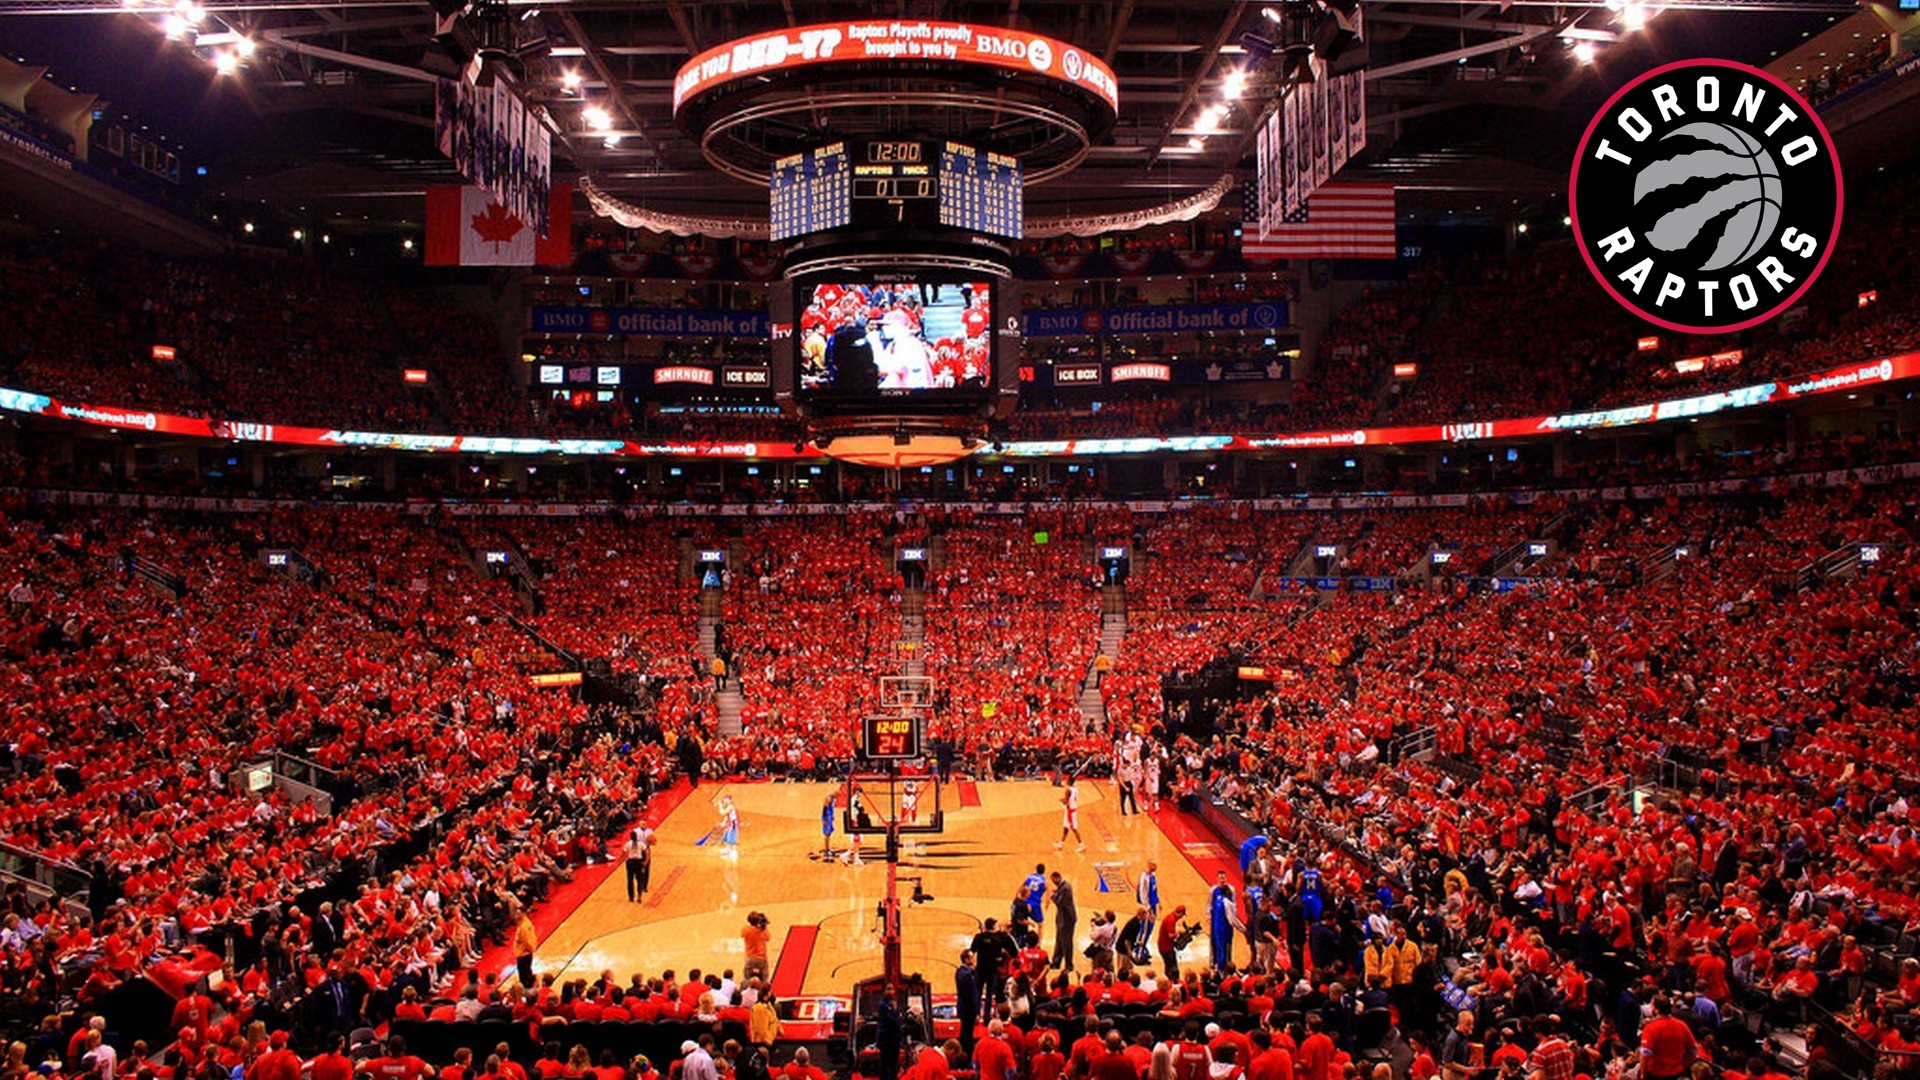 Toronto Raptors Stadium Desktop Wallpapers with image dimensions 1920x1080 pixel. You can make this wallpaper for your Desktop Computer Backgrounds, Windows or Mac Screensavers, iPhone Lock screen, Tablet or Android and another Mobile Phone device